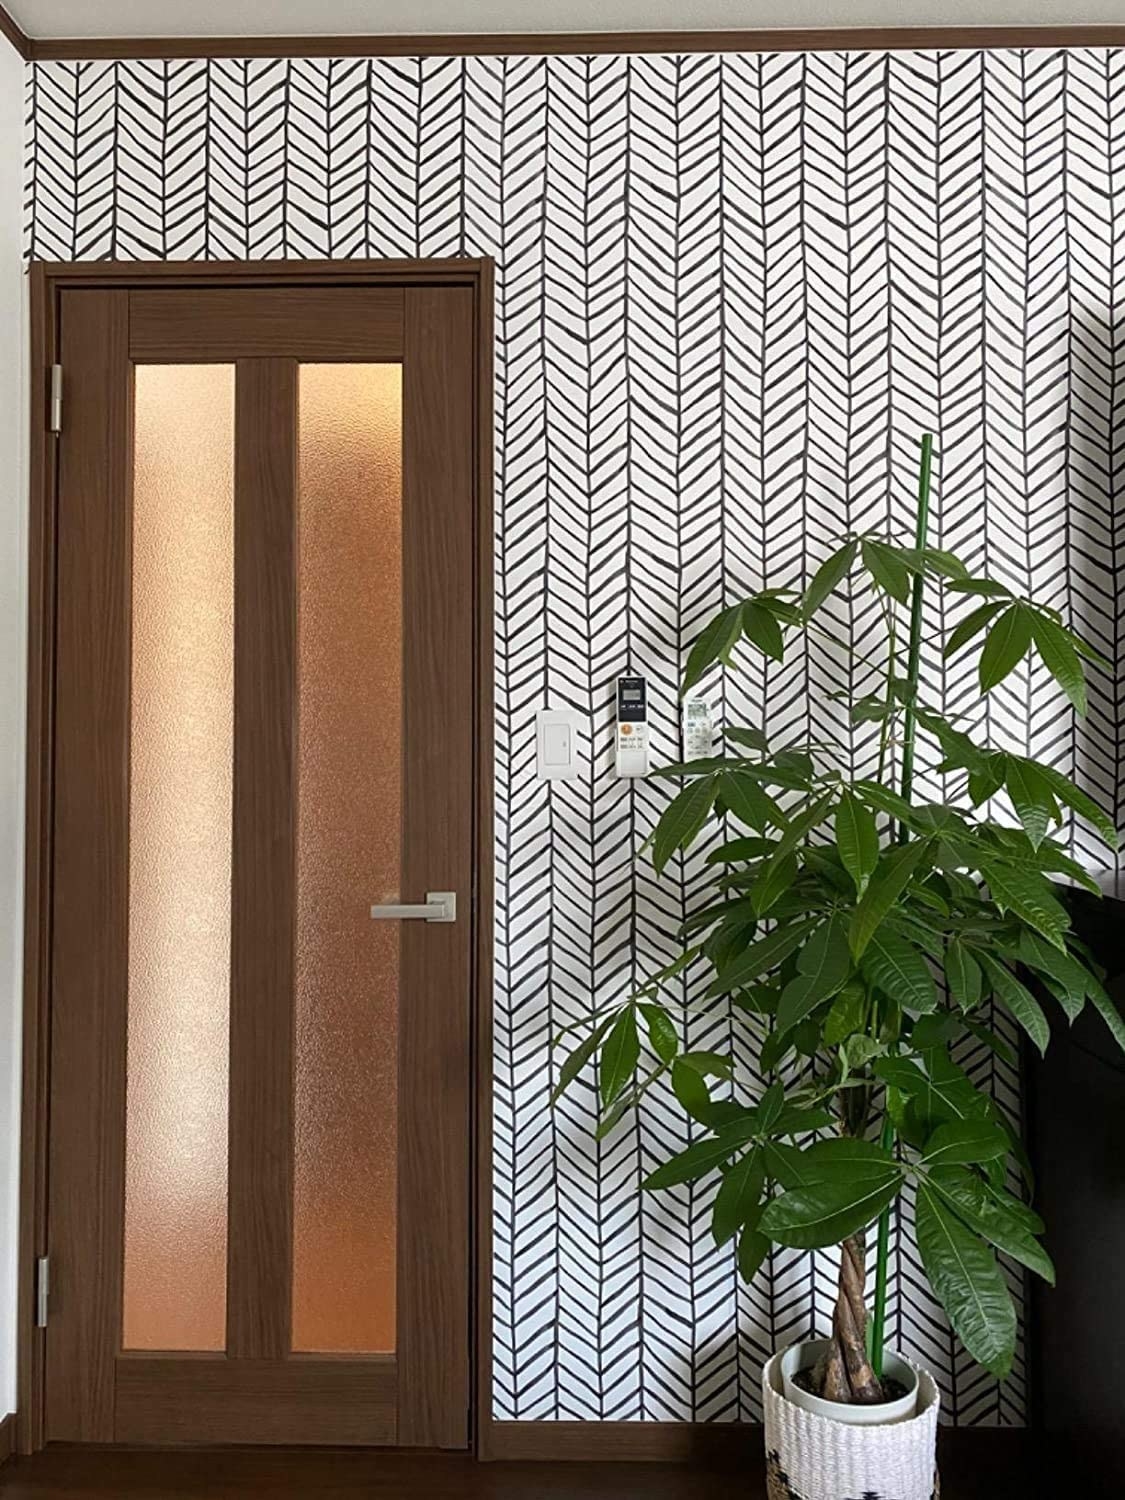 The line-patterned wallpaper on a wall next to a door and a large plant 